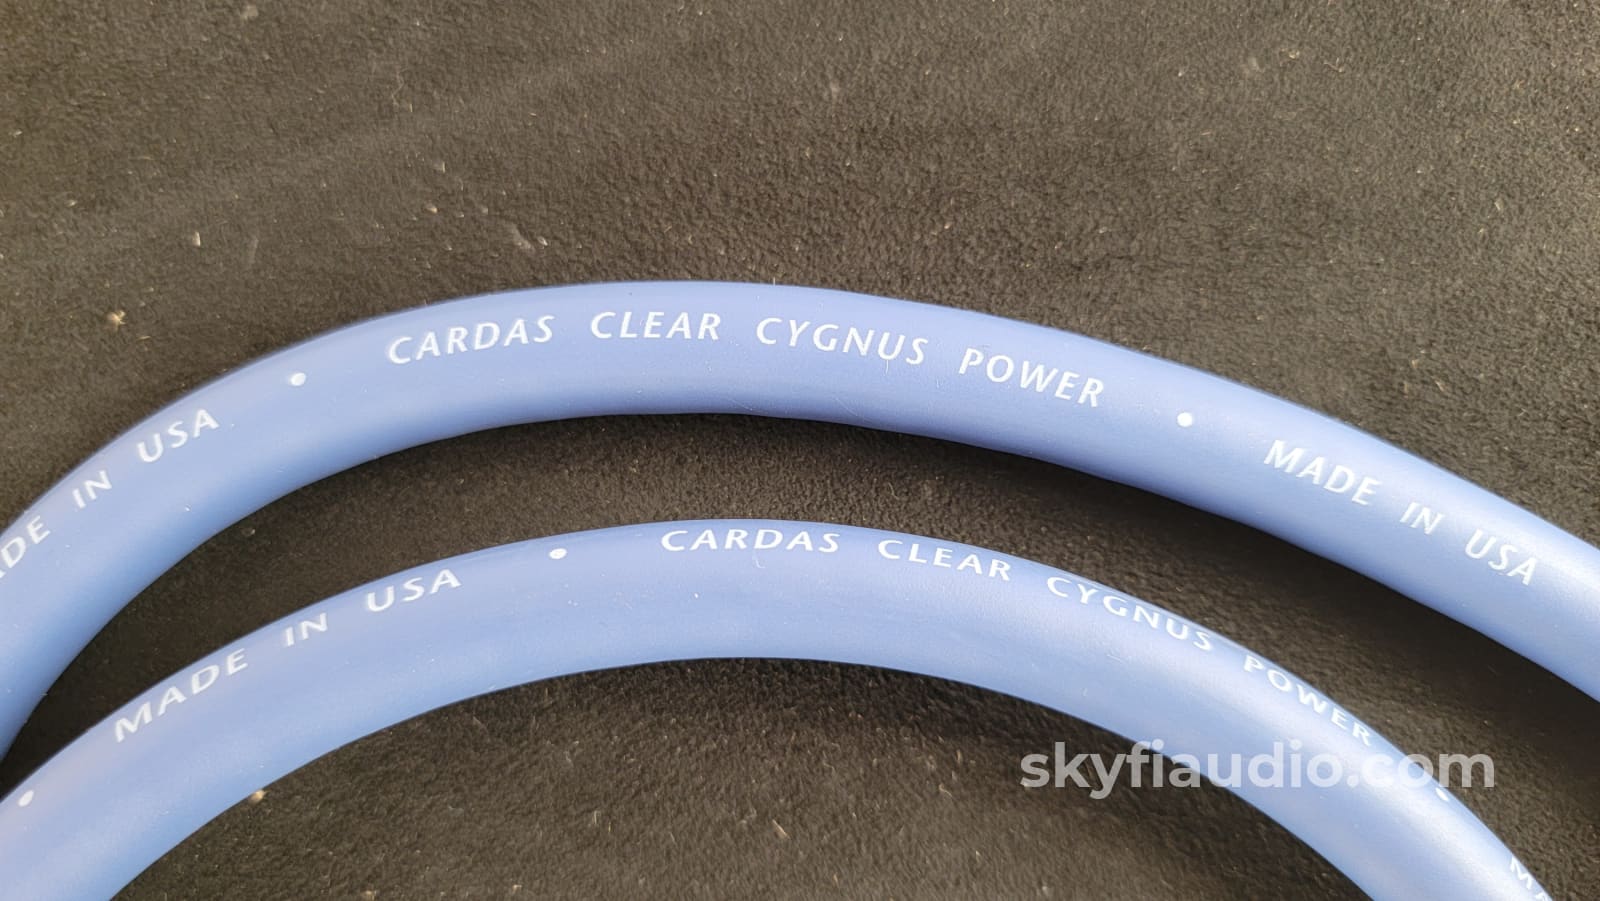 Cardas Clear Cygnus Power Cord - 1M Cables